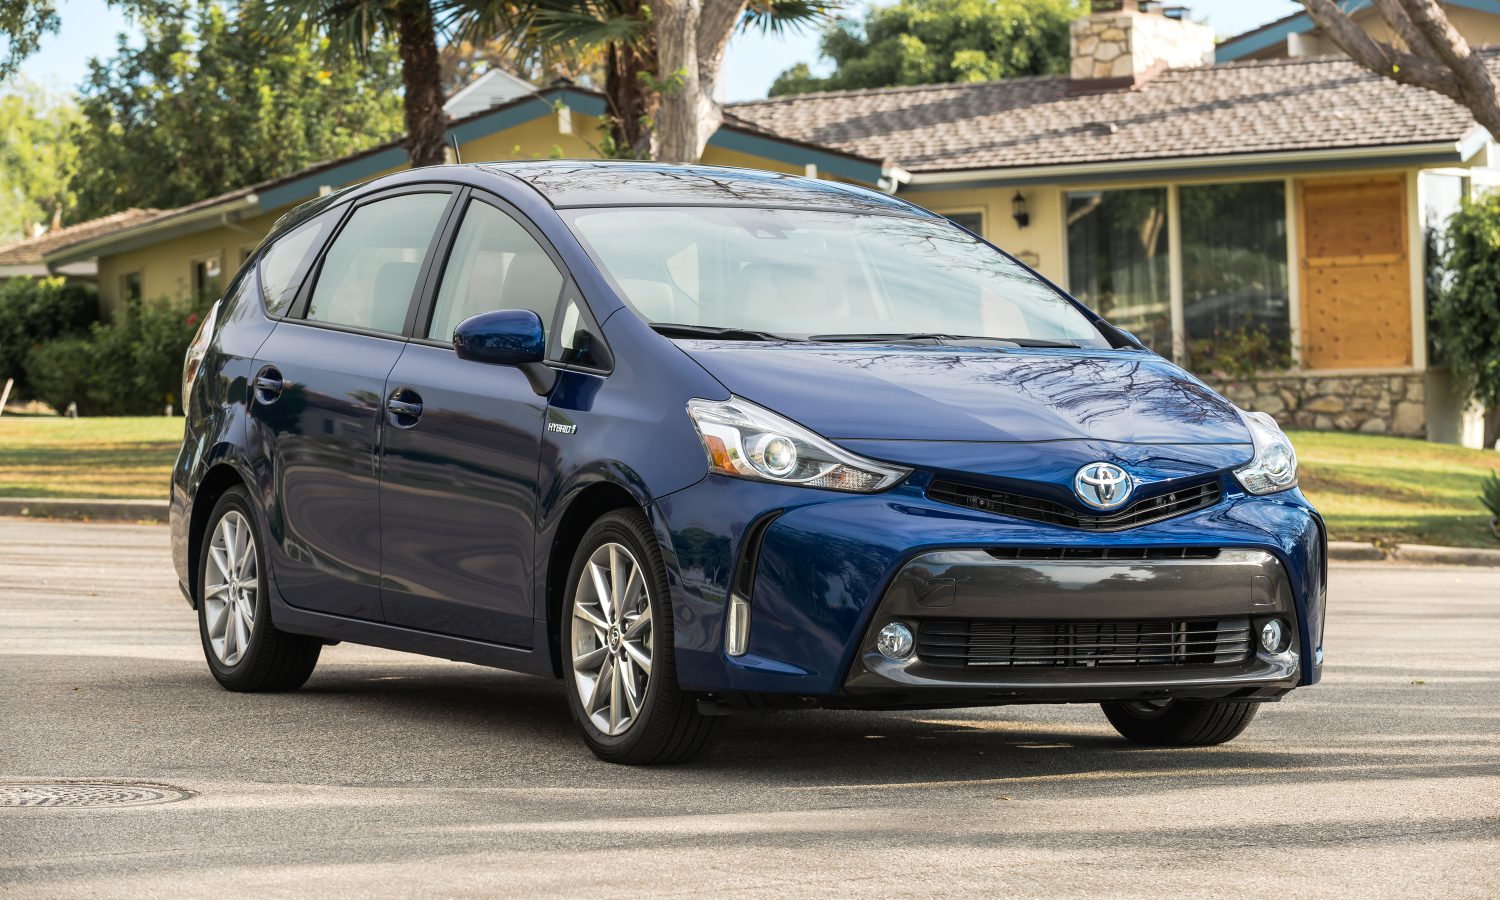 Prius v Is the Family Hybrid from America's First Family of Hybrids - Toyota  USA Newsroom